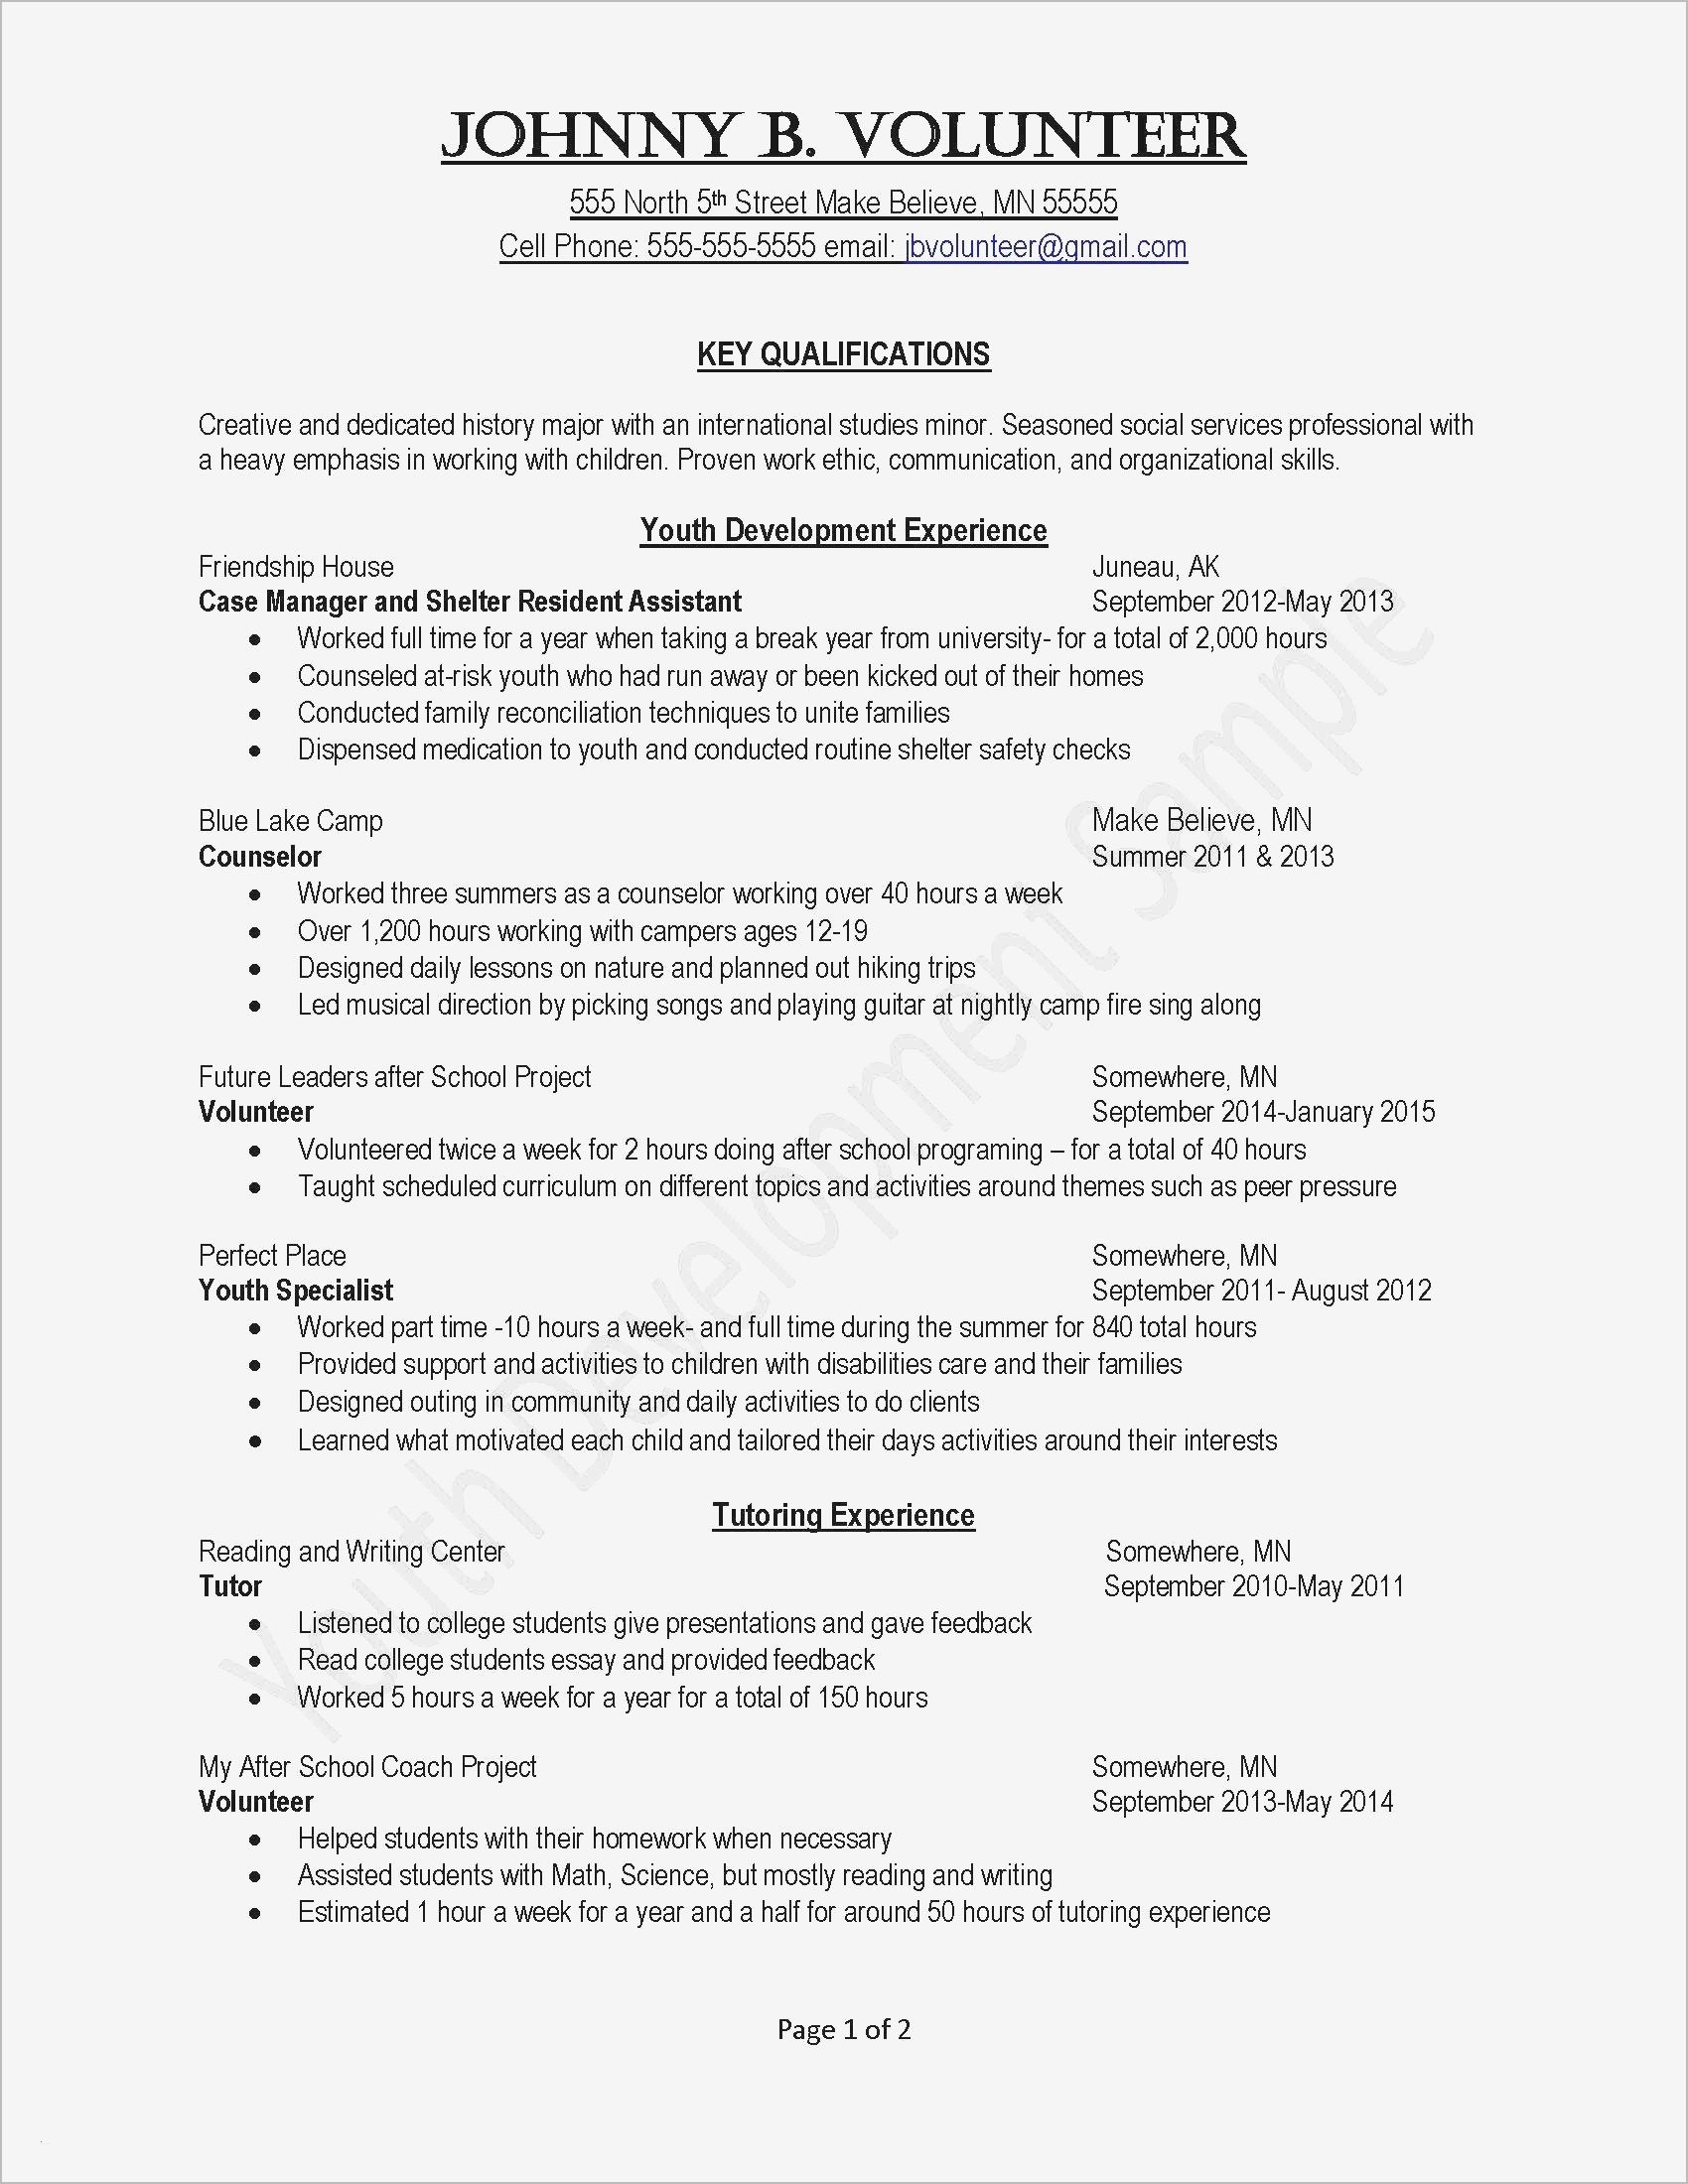 Maintenance Cover Letter Template - General Maintenance Resume New Job Fer Letter Template Us Copy Od